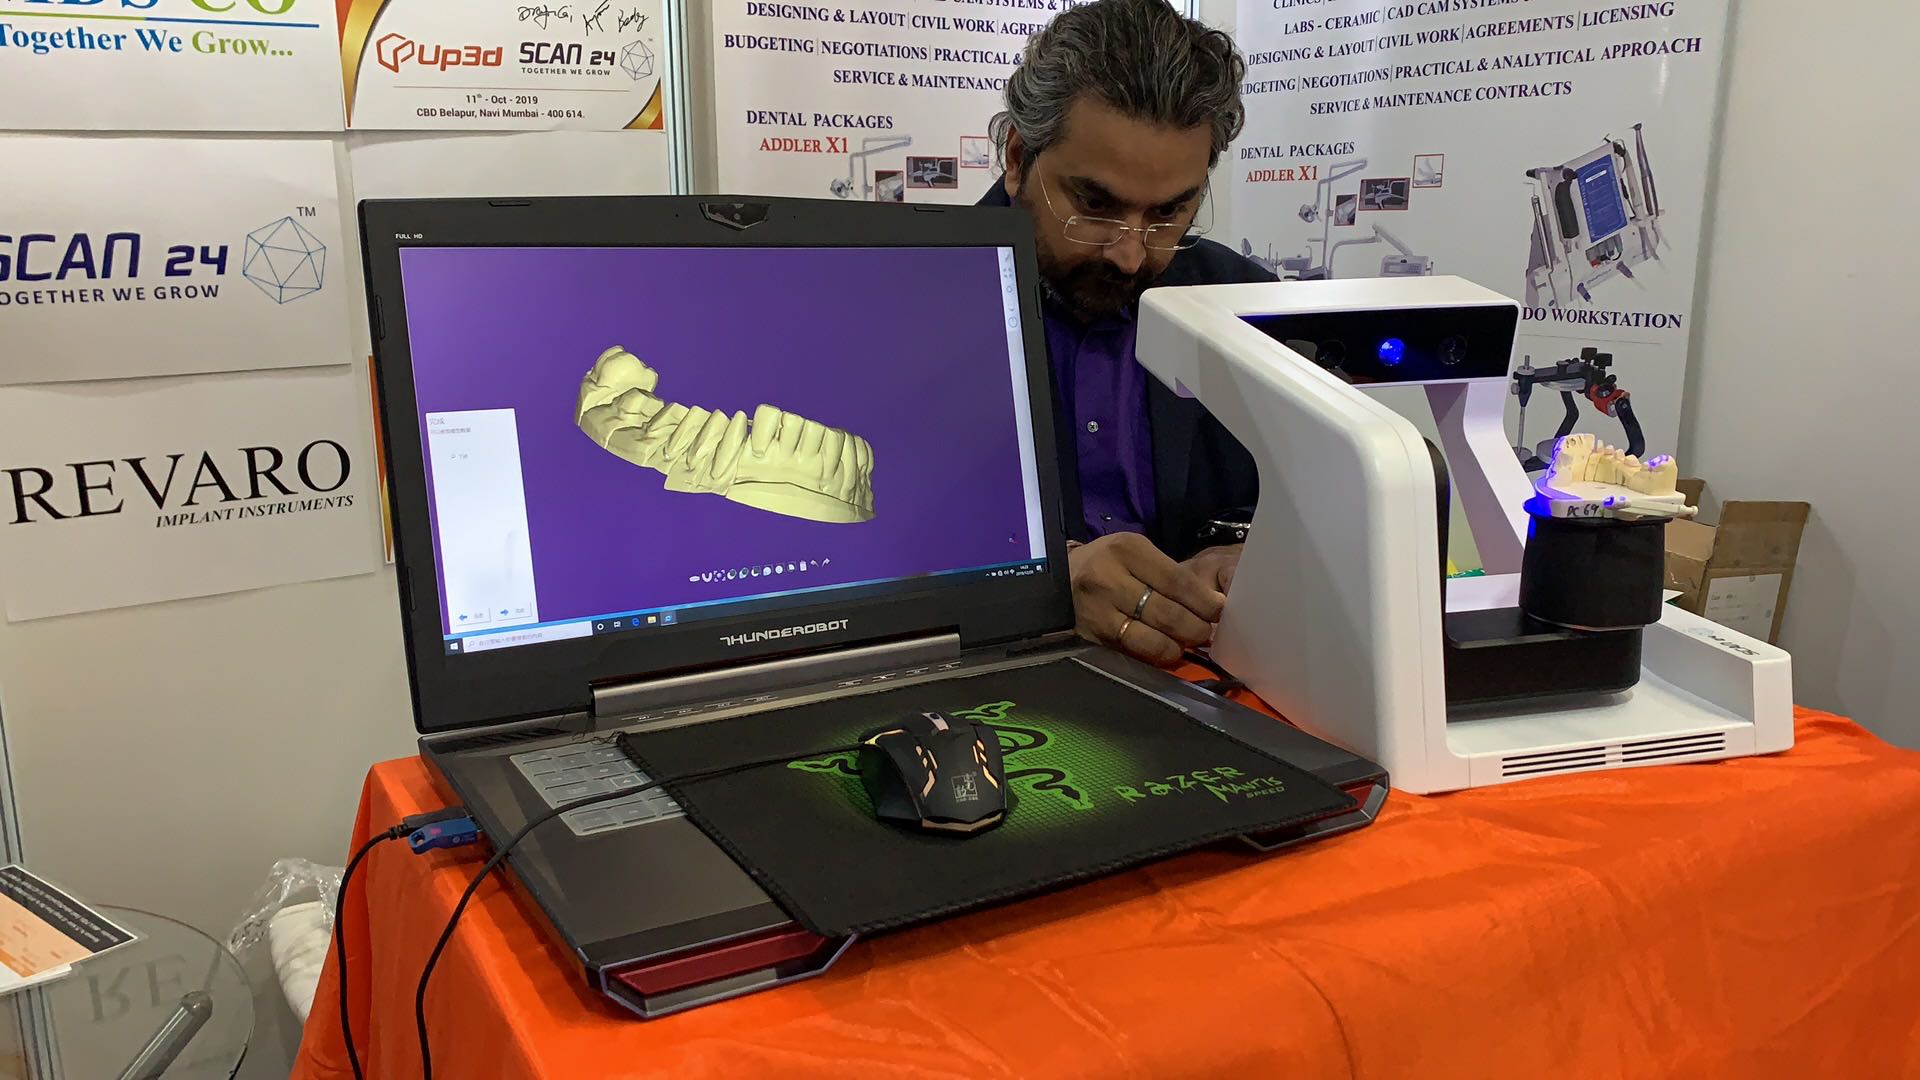 At the  exhibition, scanners produced by CEDU are being displayed